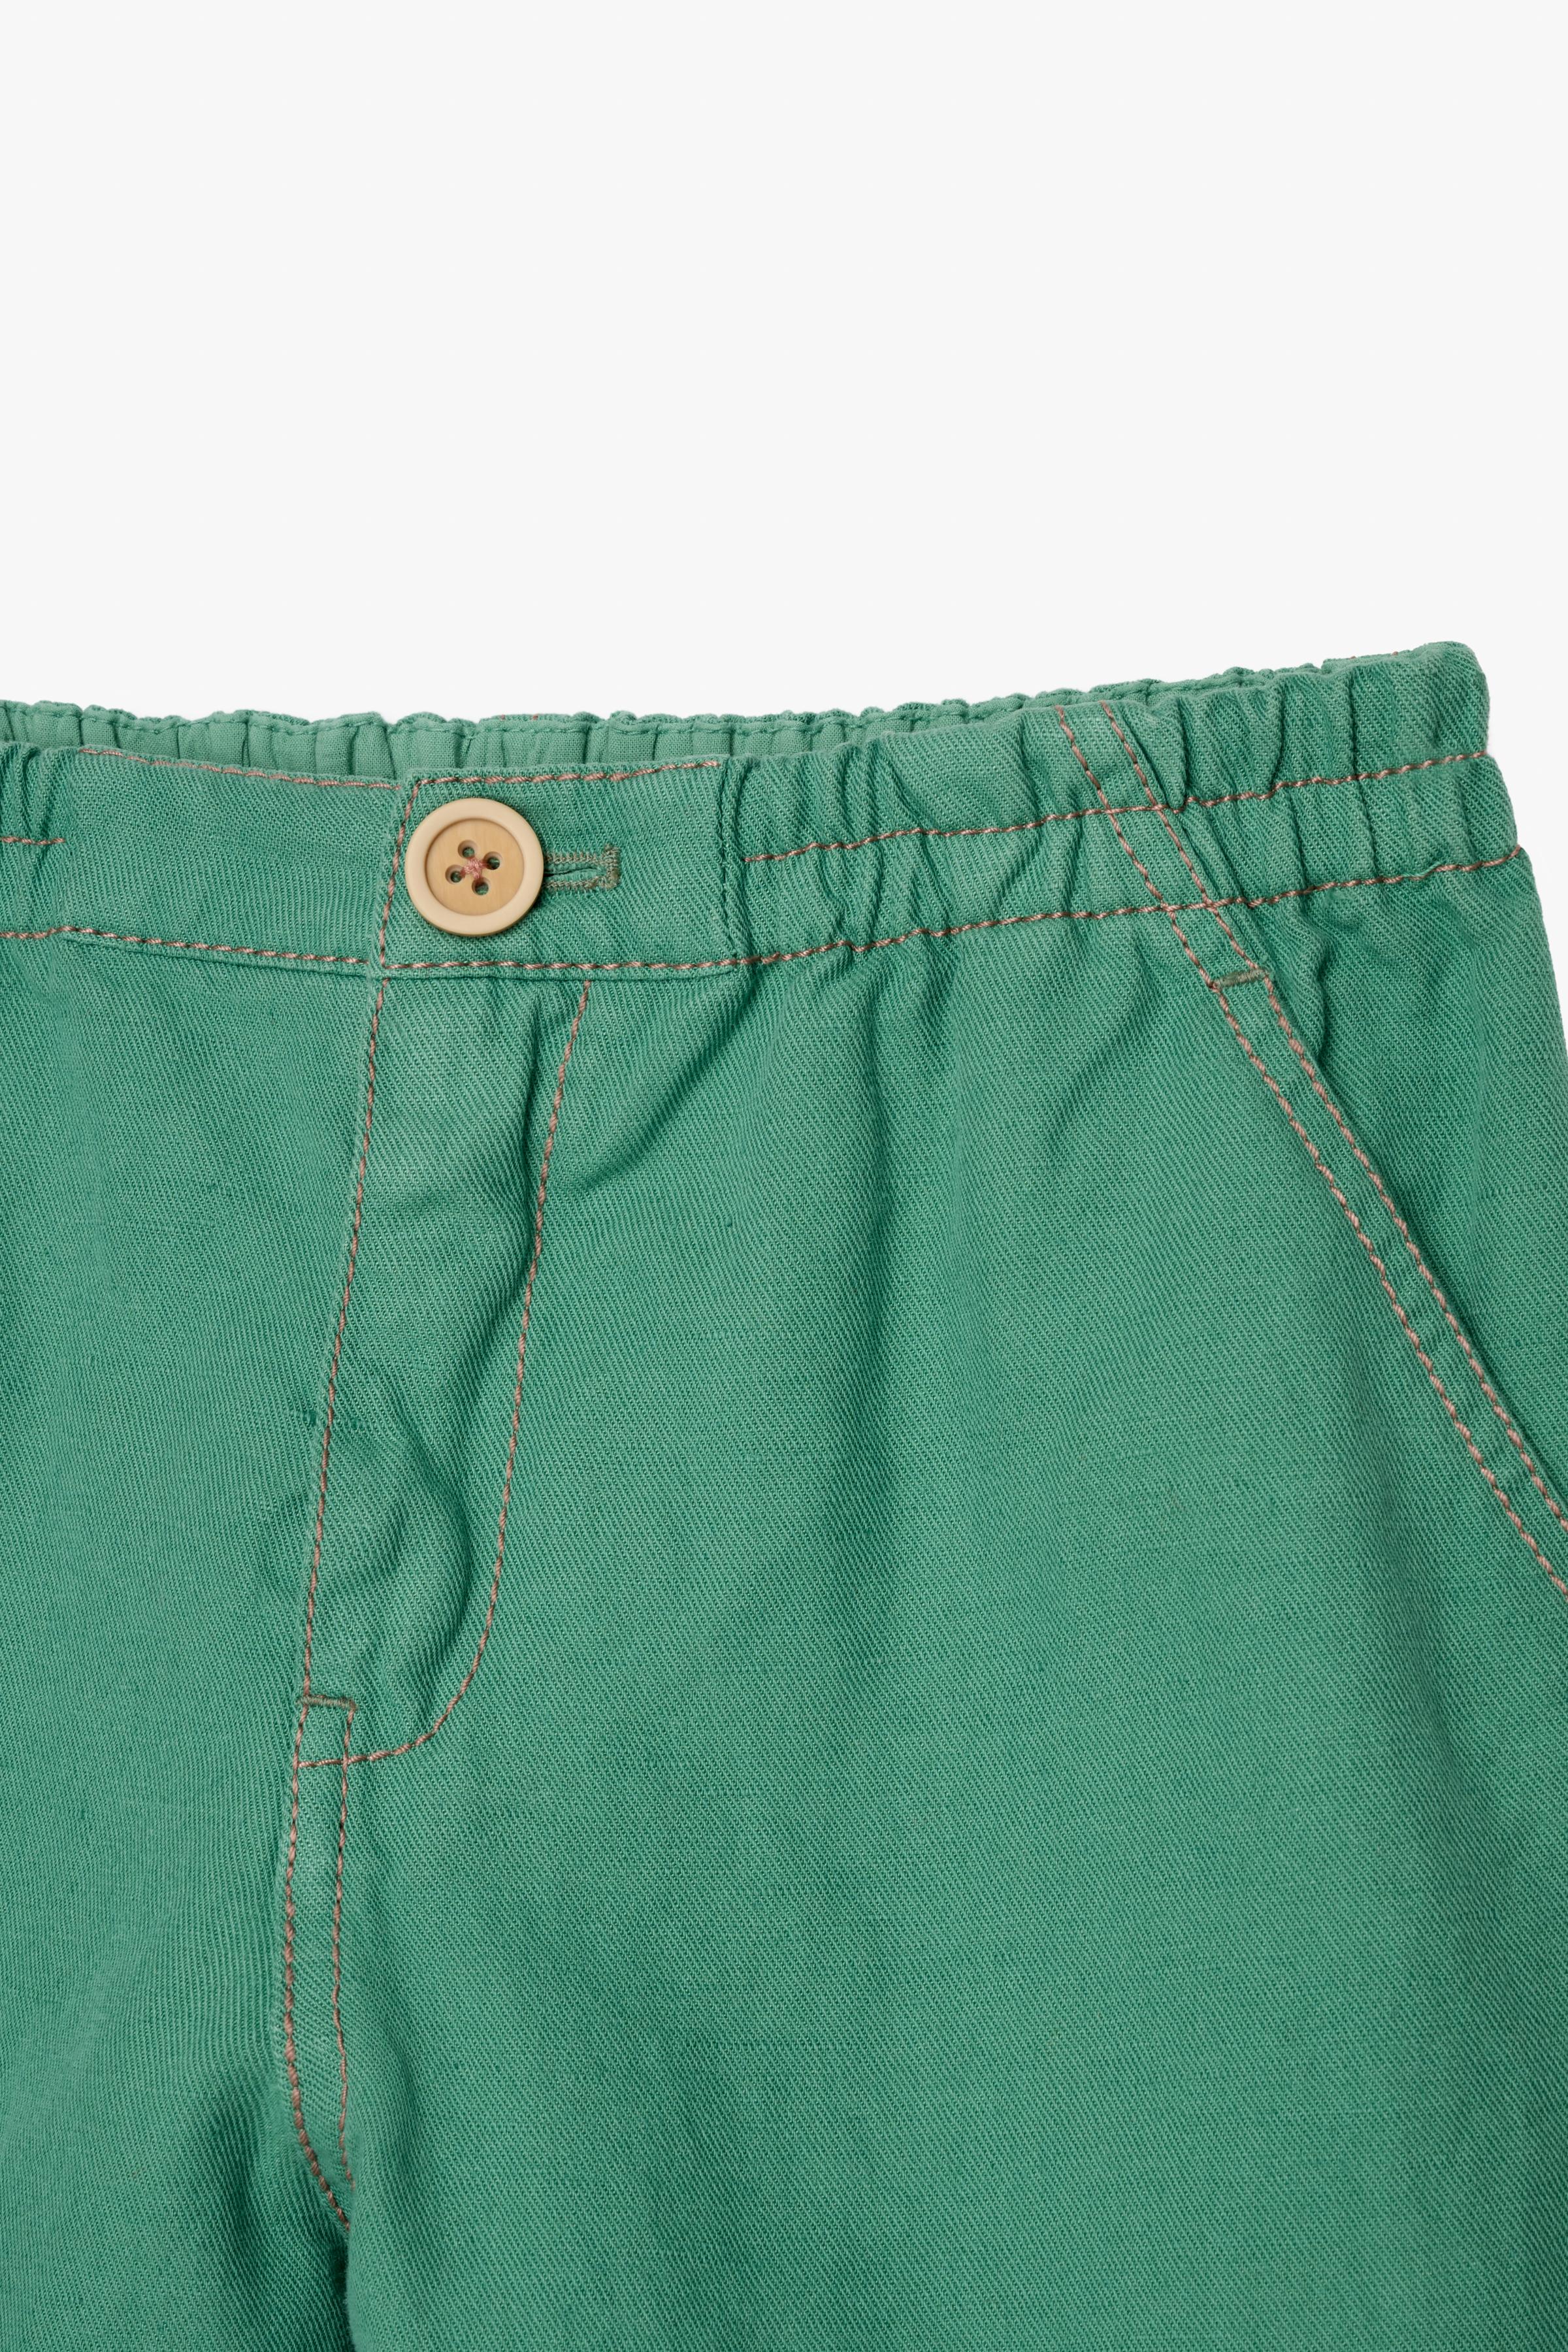 TOPSTITCHED LINEN BLEND SHORTS LIMITED EDITION